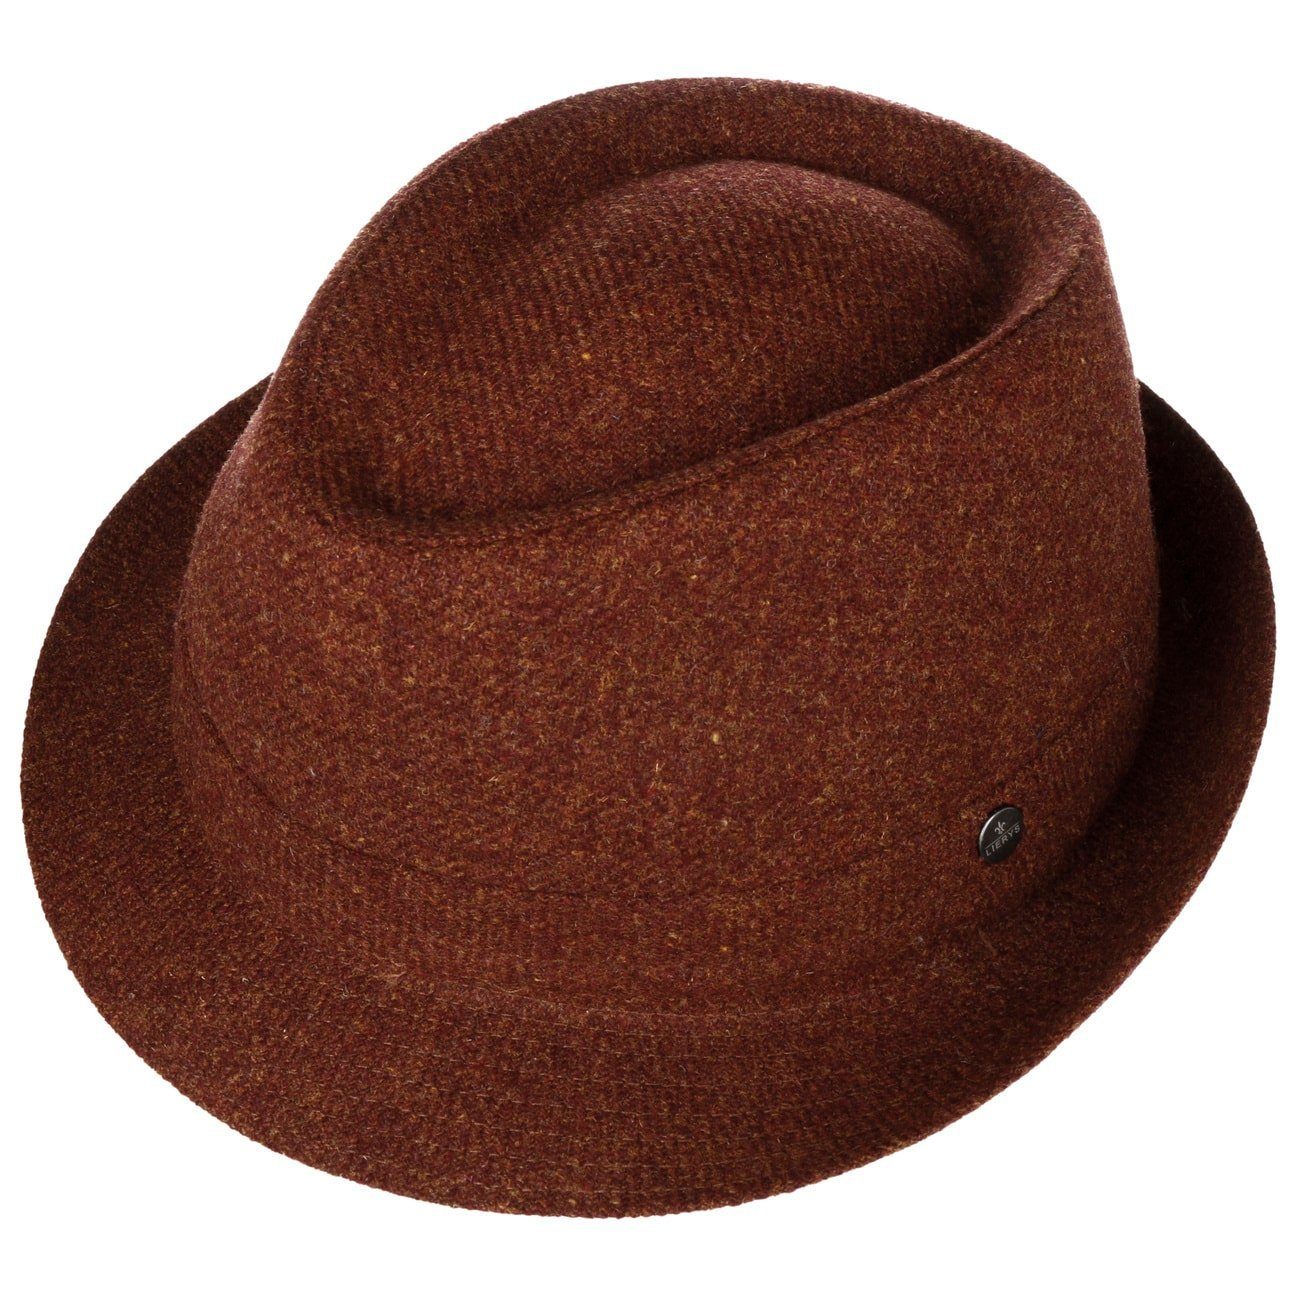 Lierys Trilby (1-St) in Italy Wolltrilby Futter, rost Made mit